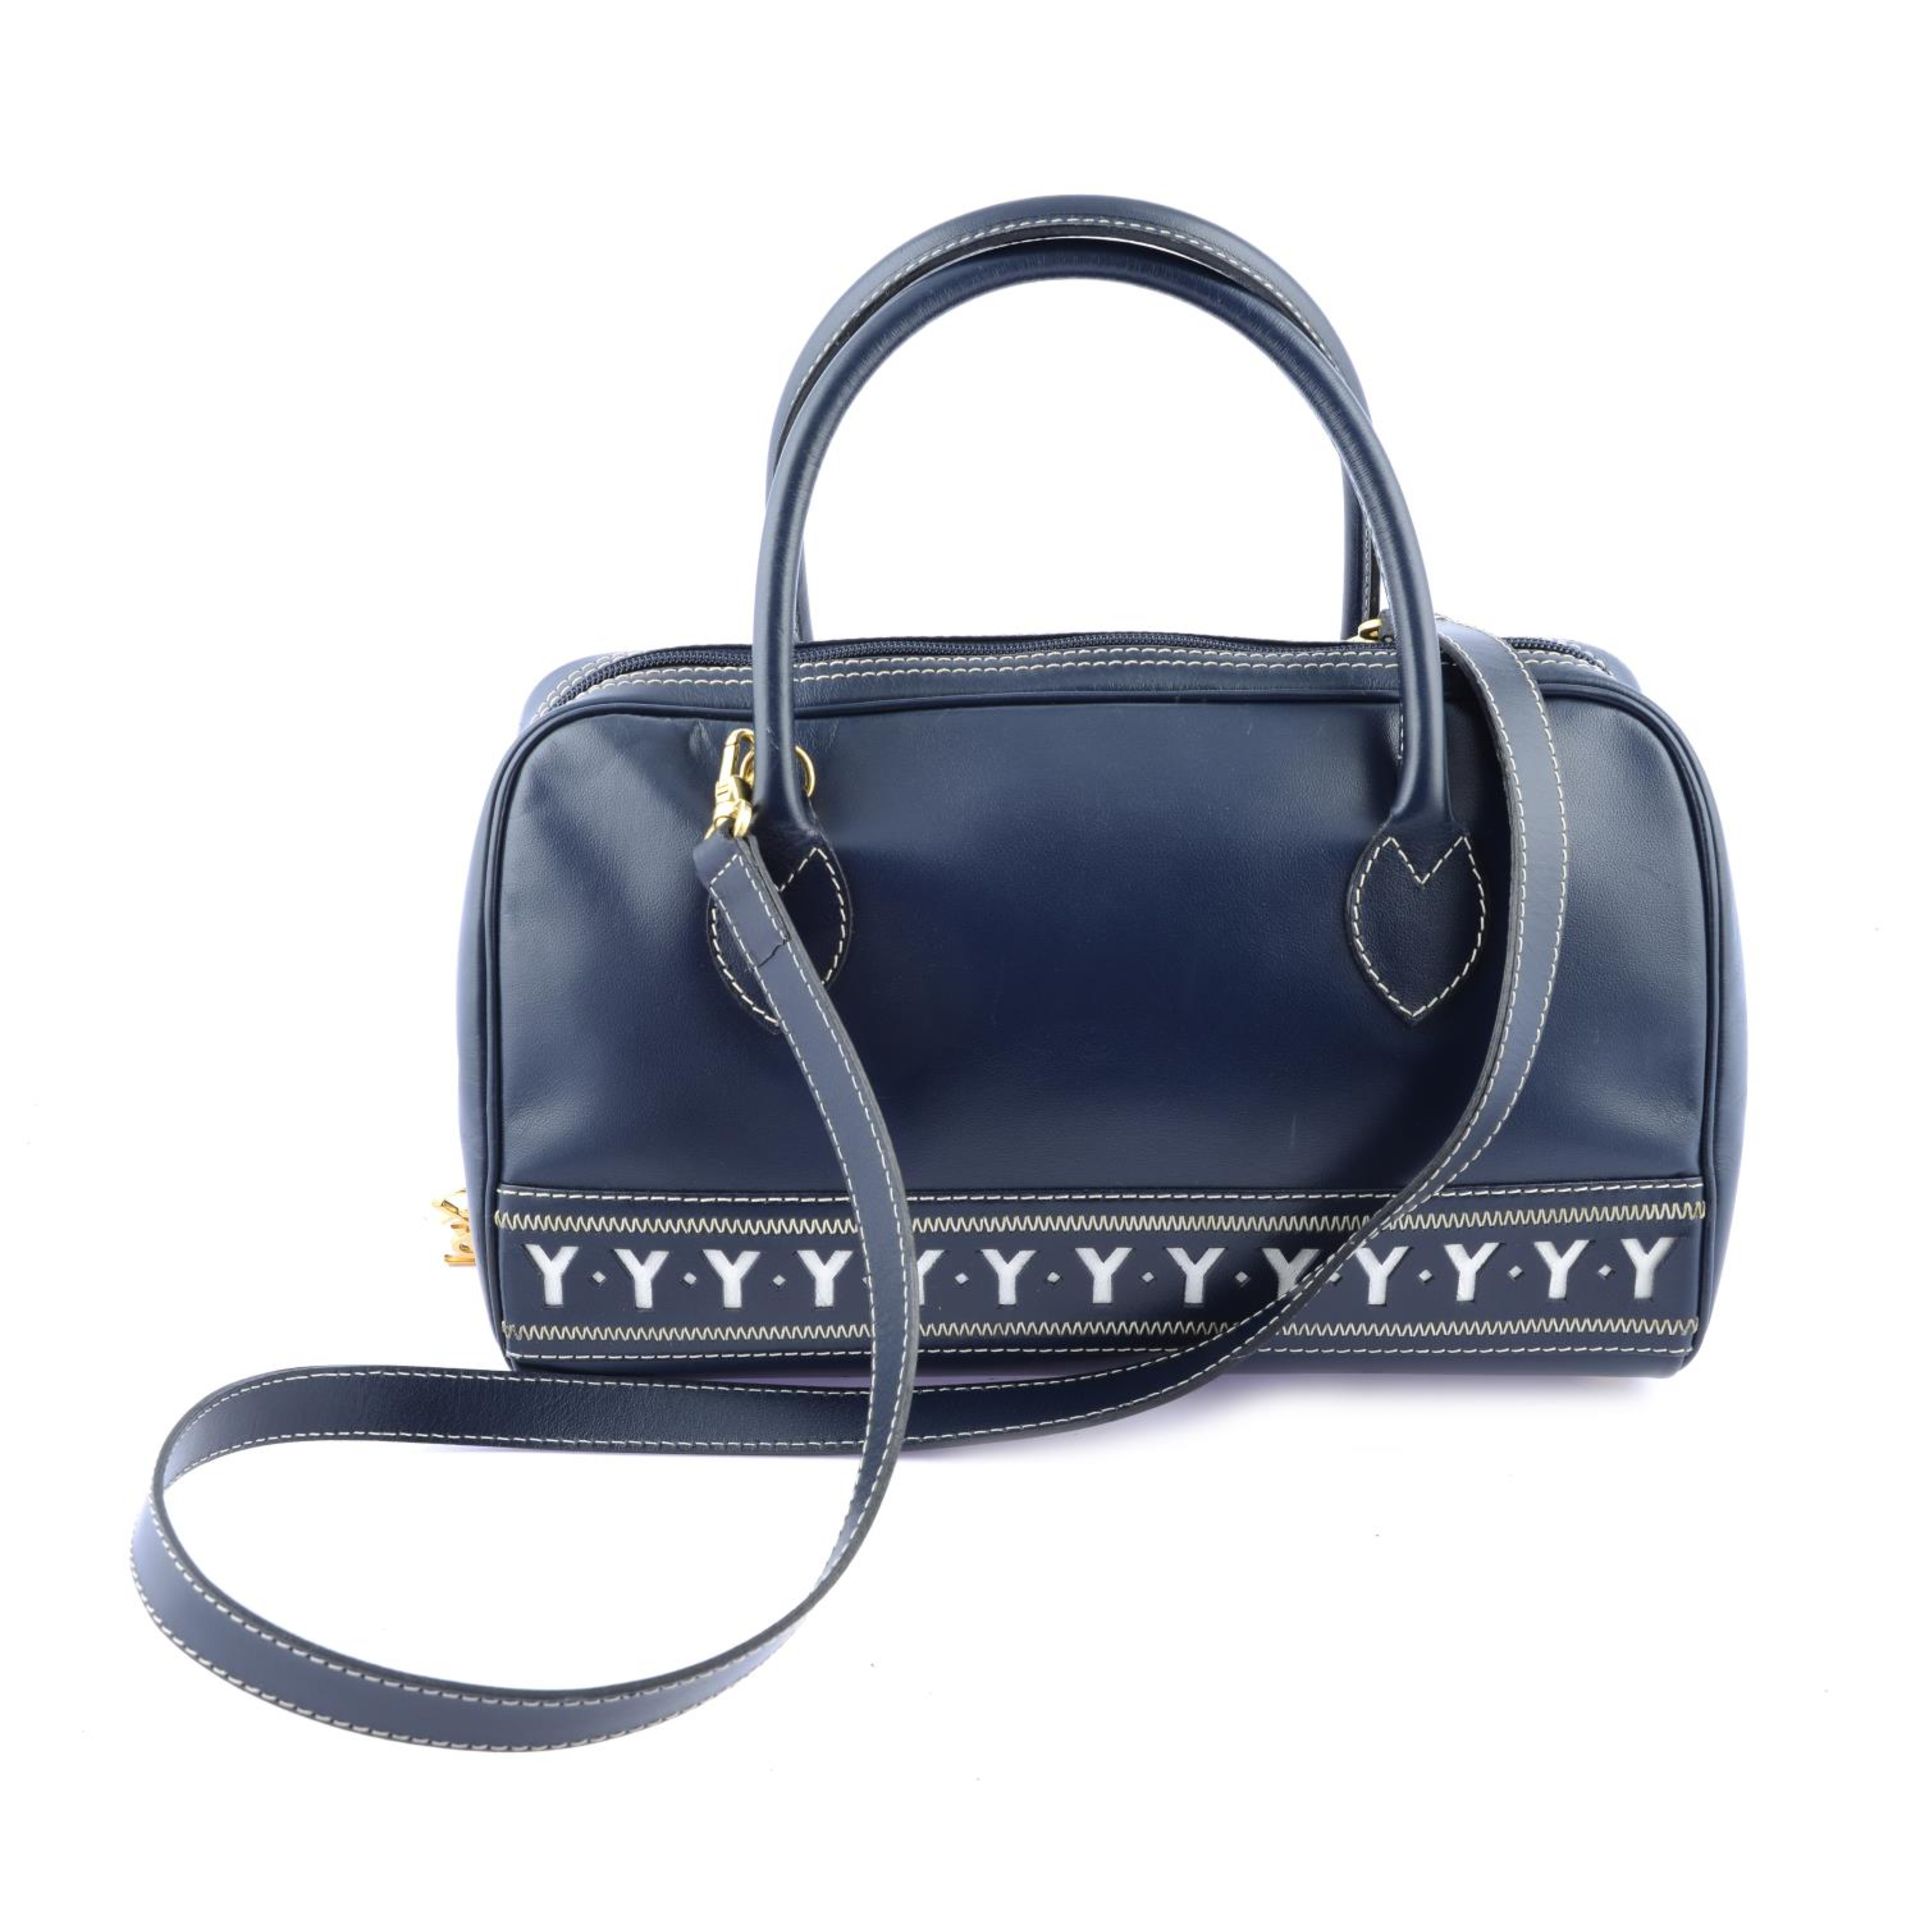 YVES SAINT LAURENT - a navy blue Y Logo Bowling bag. - Image 2 of 4